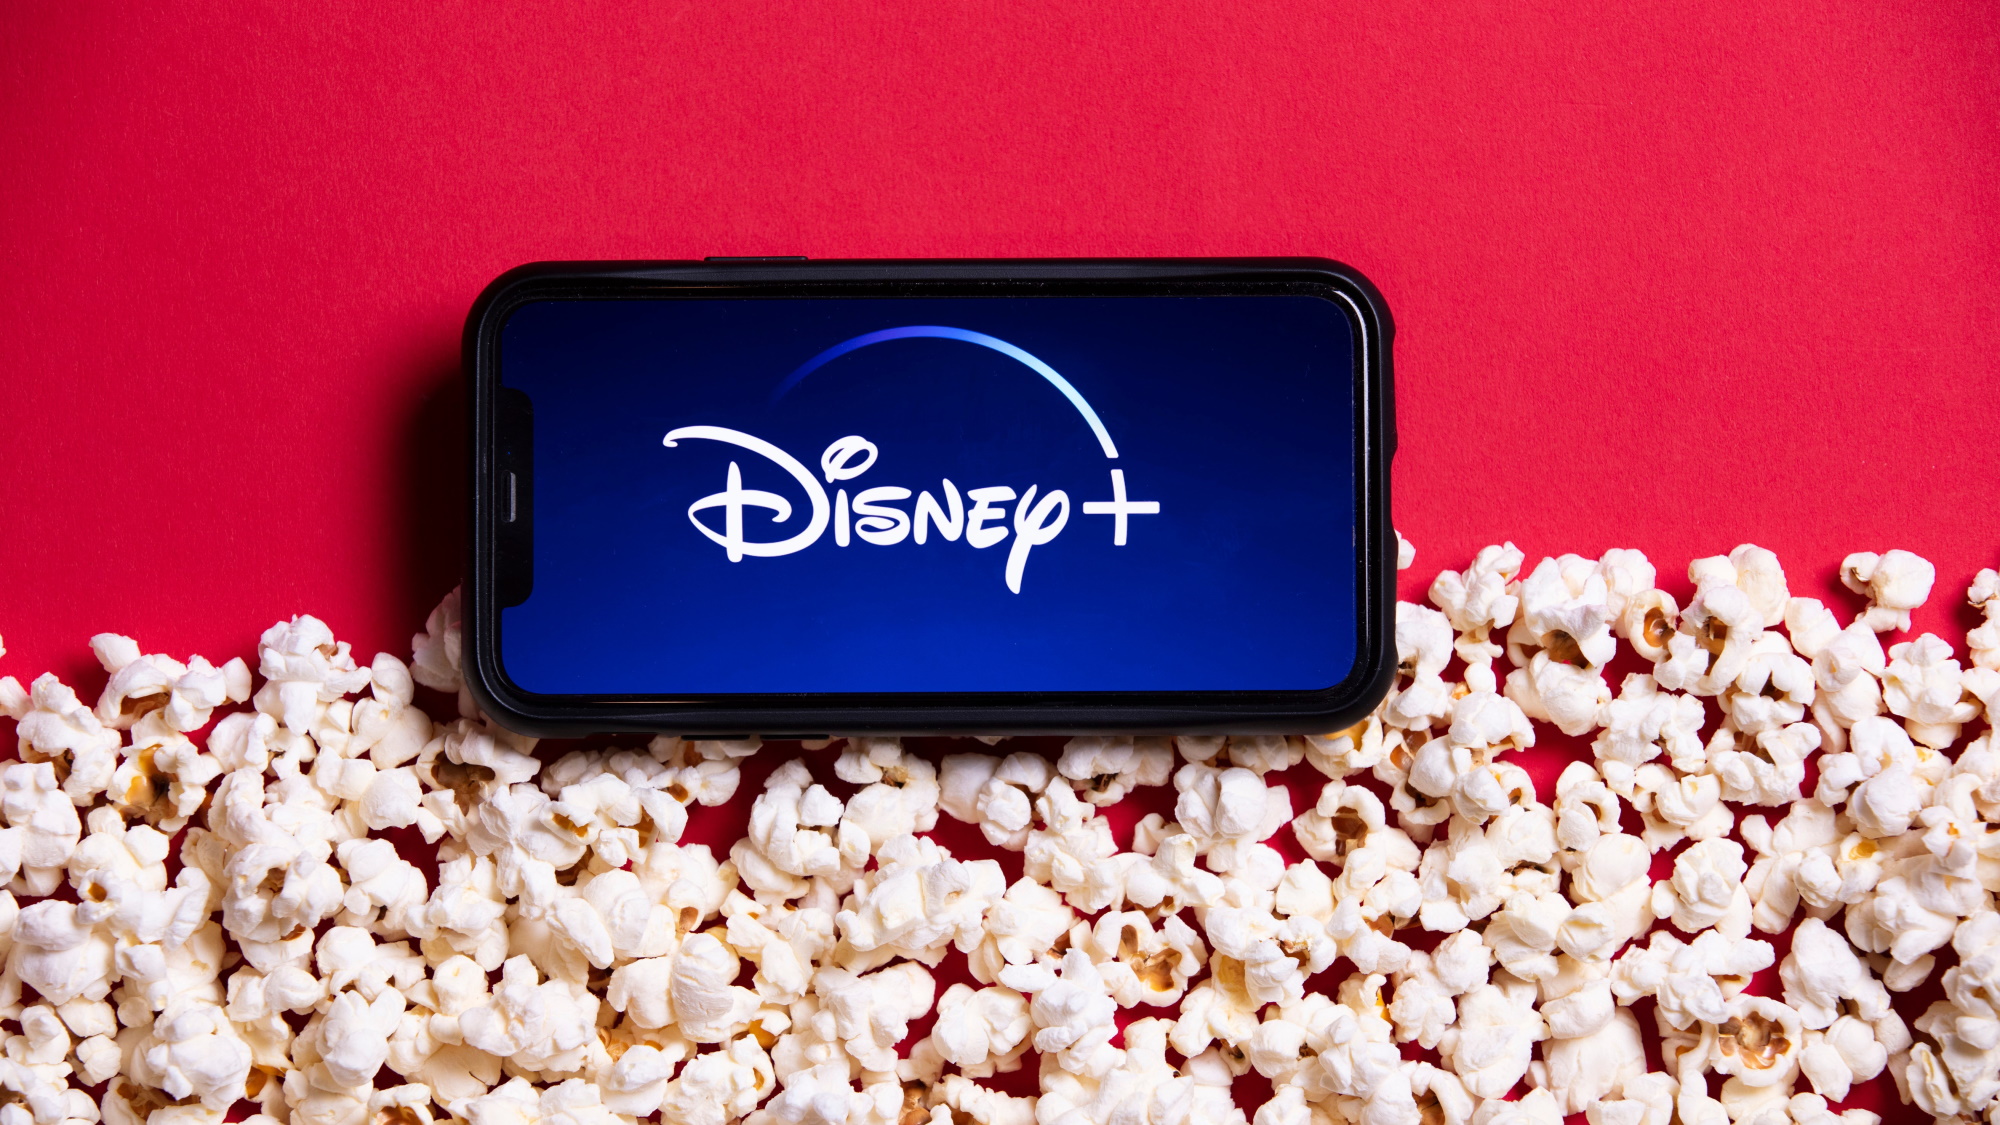 Is Disney Plus Worth It? Check Out the Best Deals & Discounts